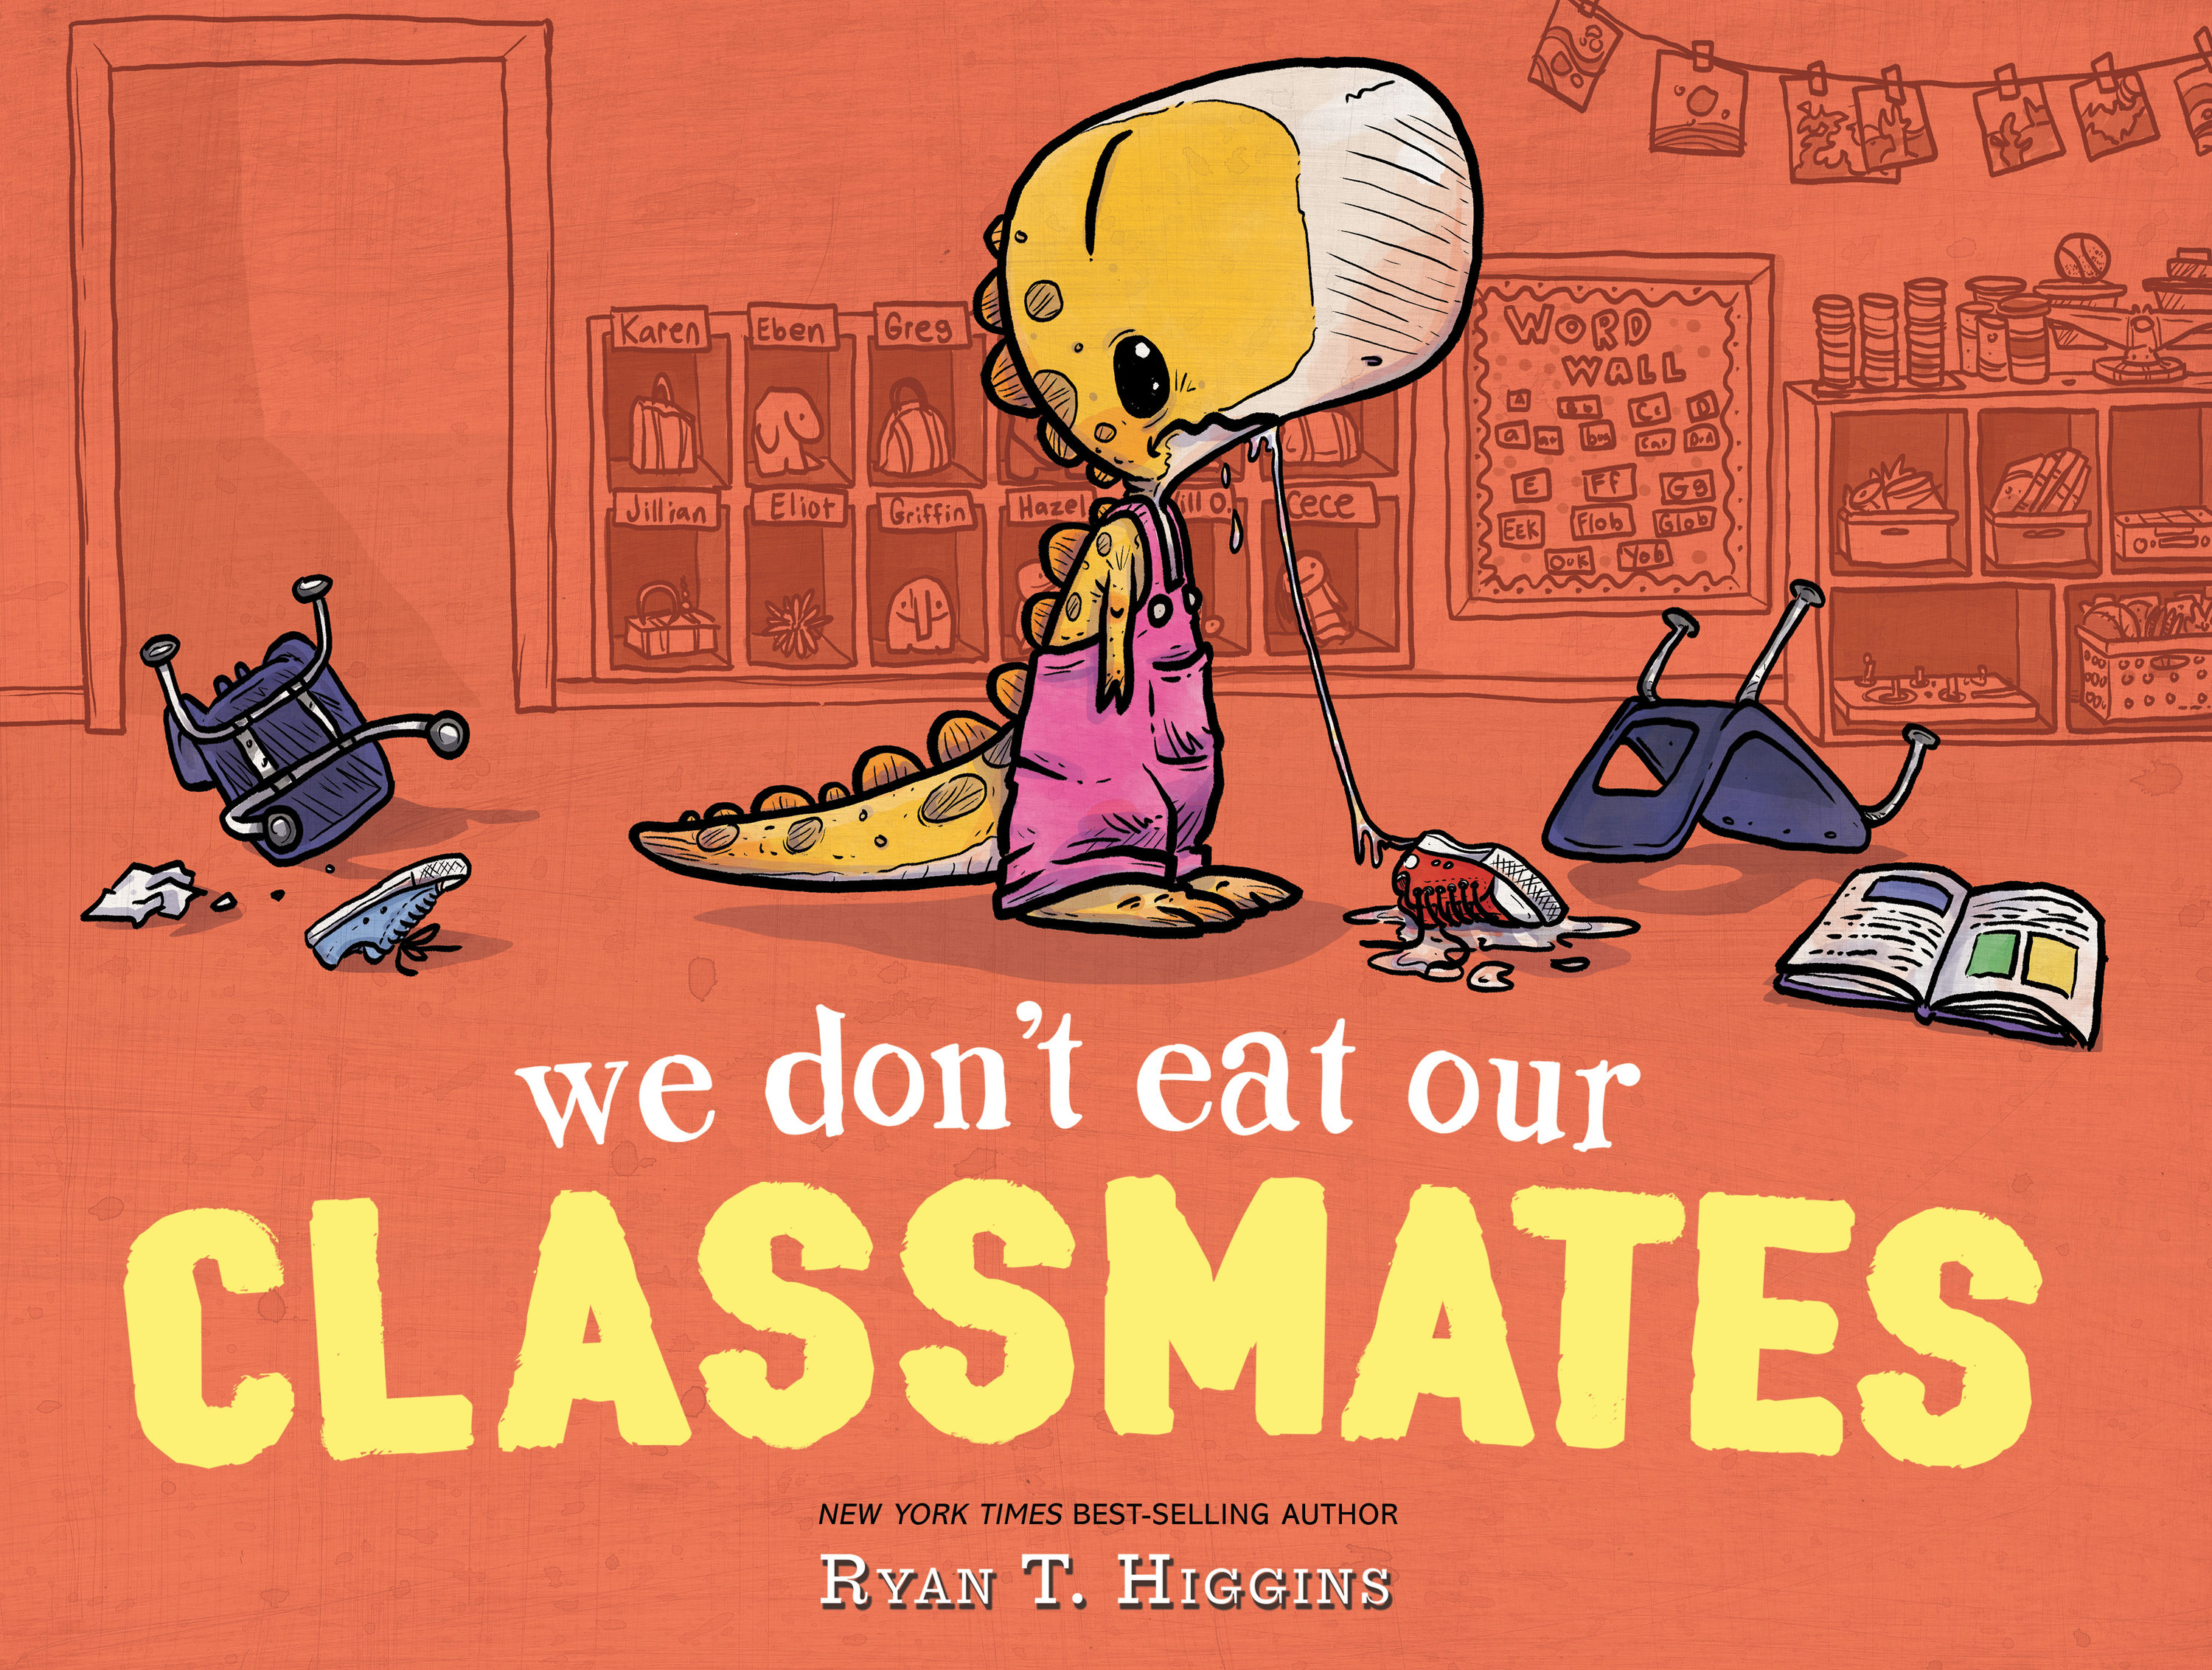 A dinosaur in pink overalls stands in the middle of a classroom. There&#x27;s a read sneaker by her feet with droll puddled around it. The text reads: We don&#x27;t eat our classmates